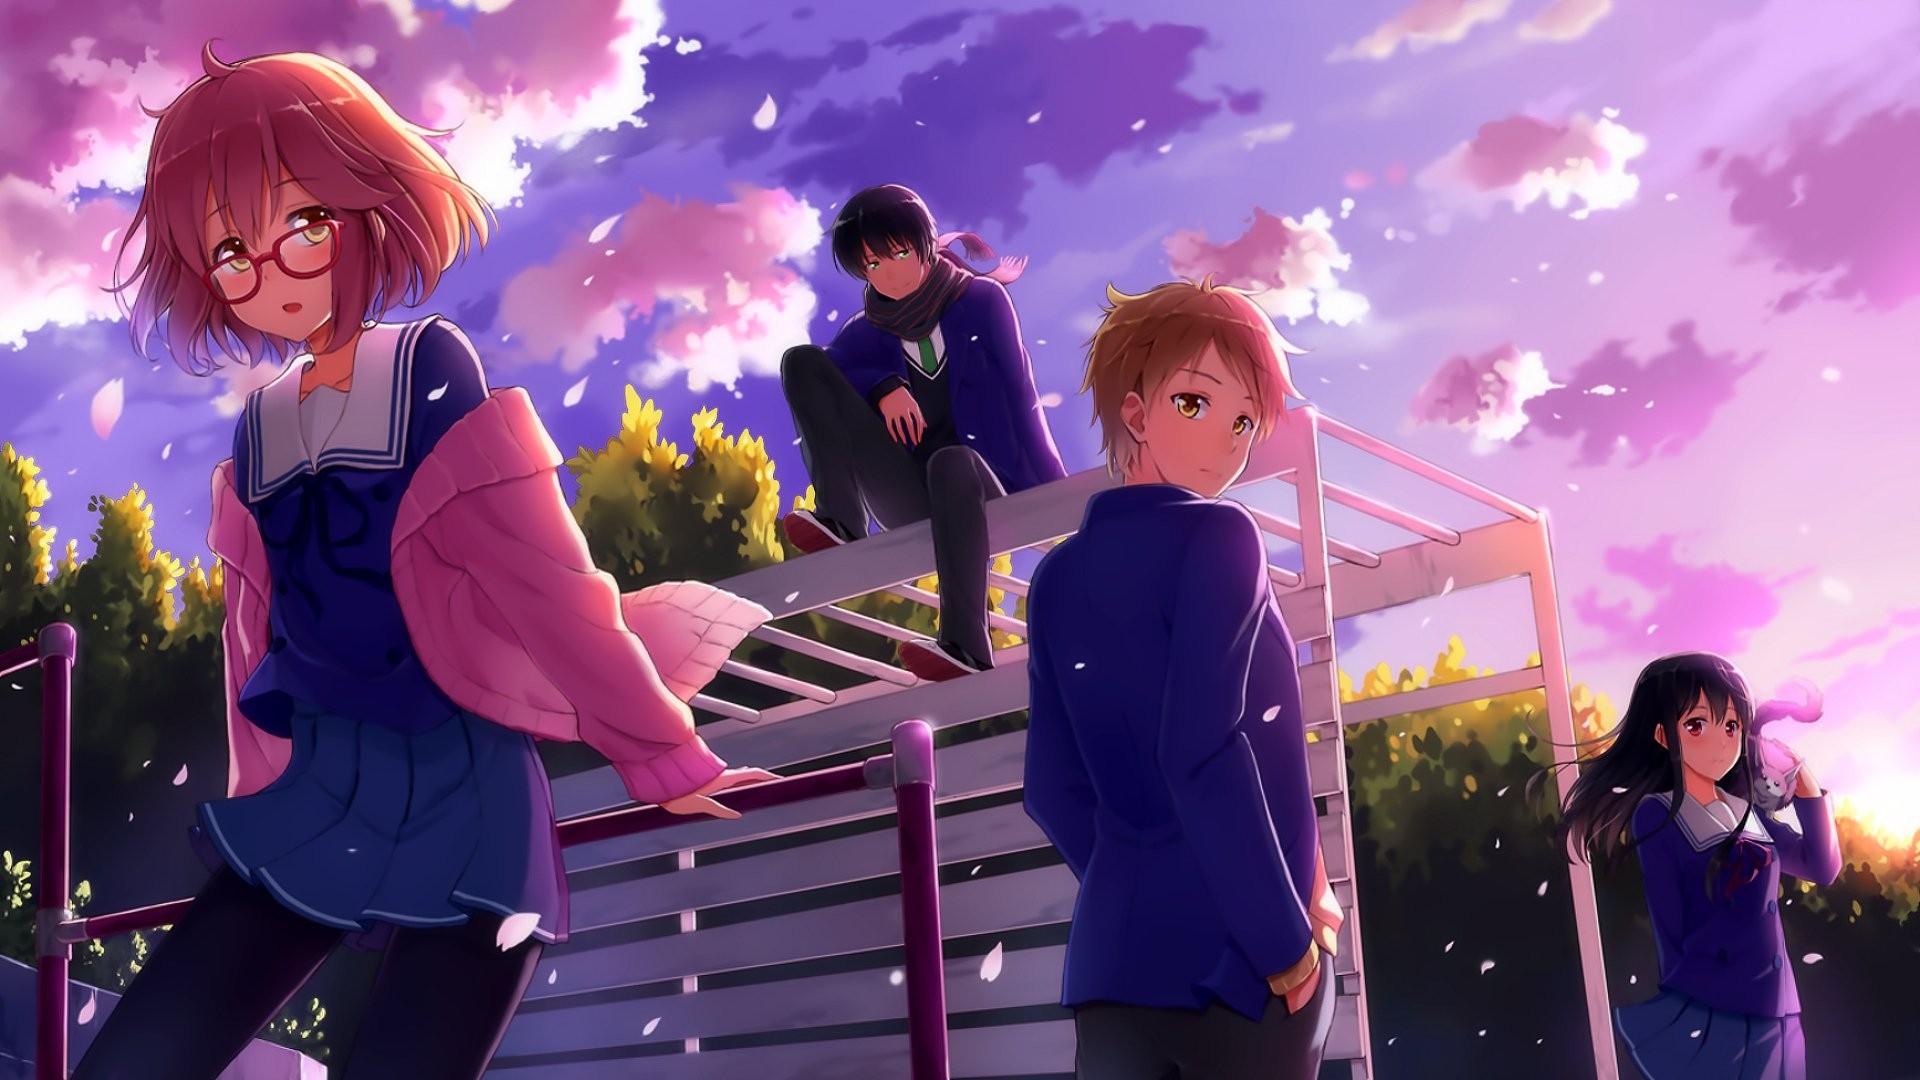 Beyond the Boundary wallpaper ·① Download free stunning High Resolution